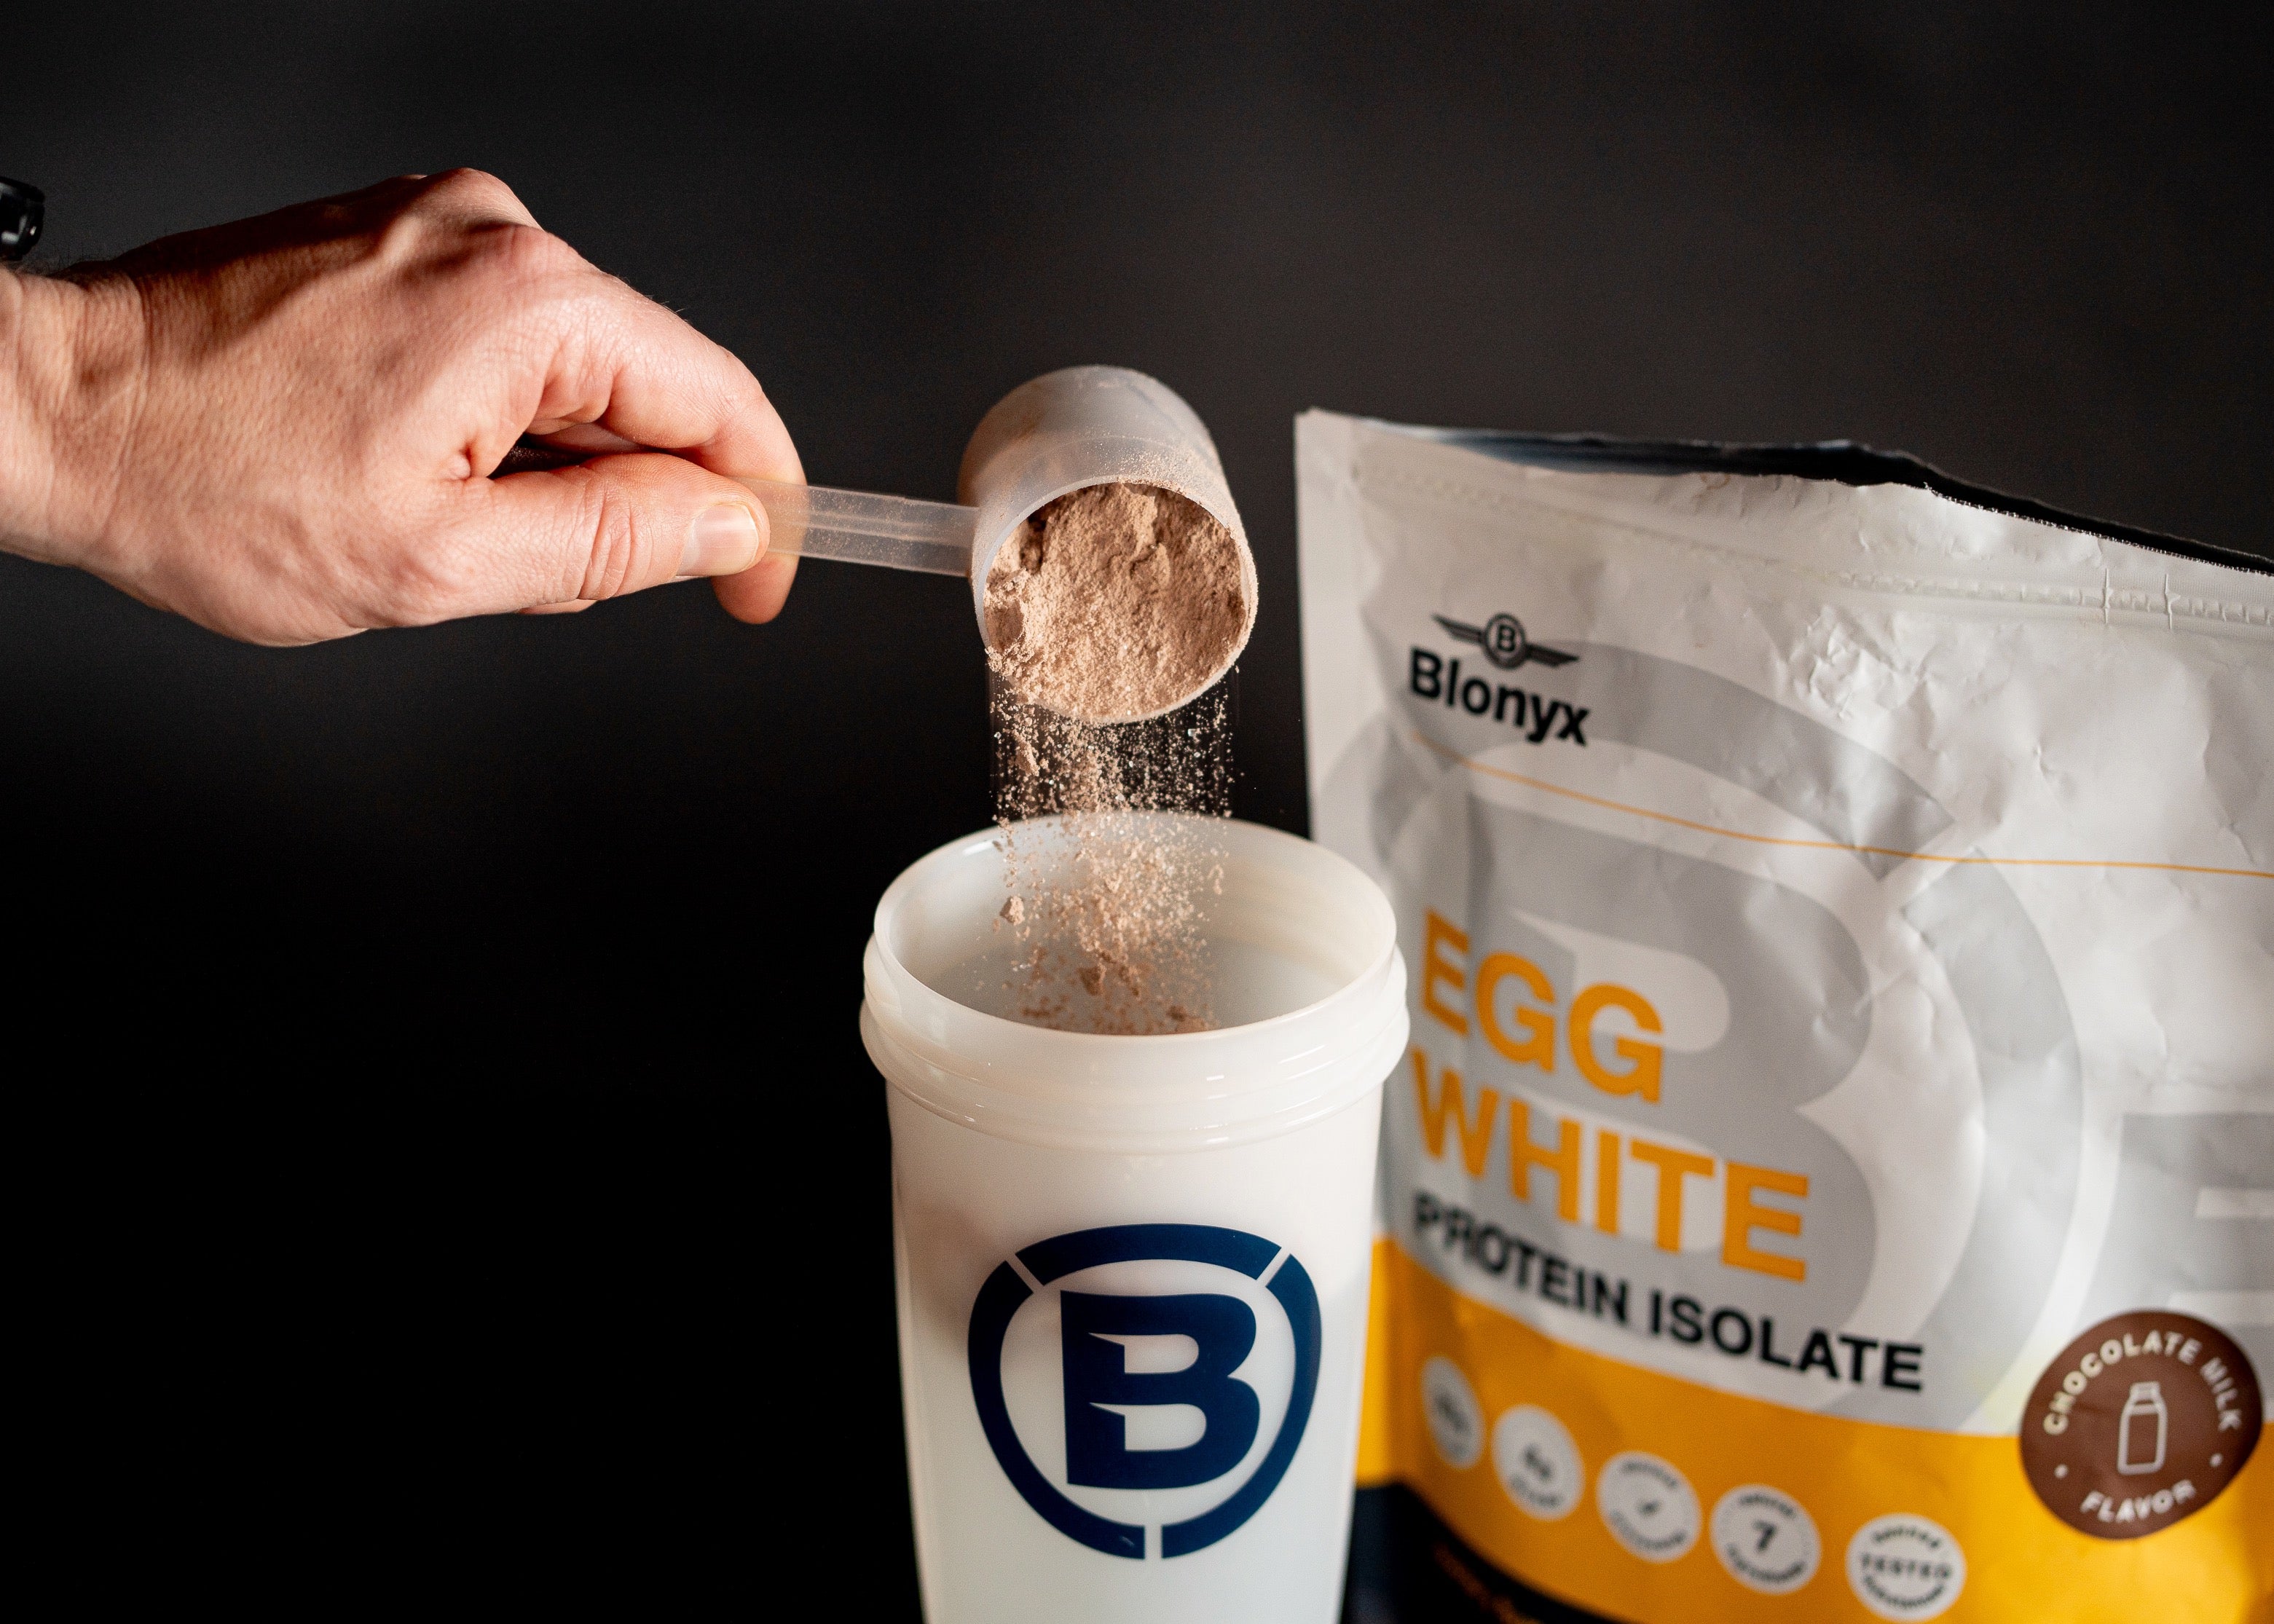 The Inside Scoop: How We Make Our Egg White Protein Isolate (and Why)